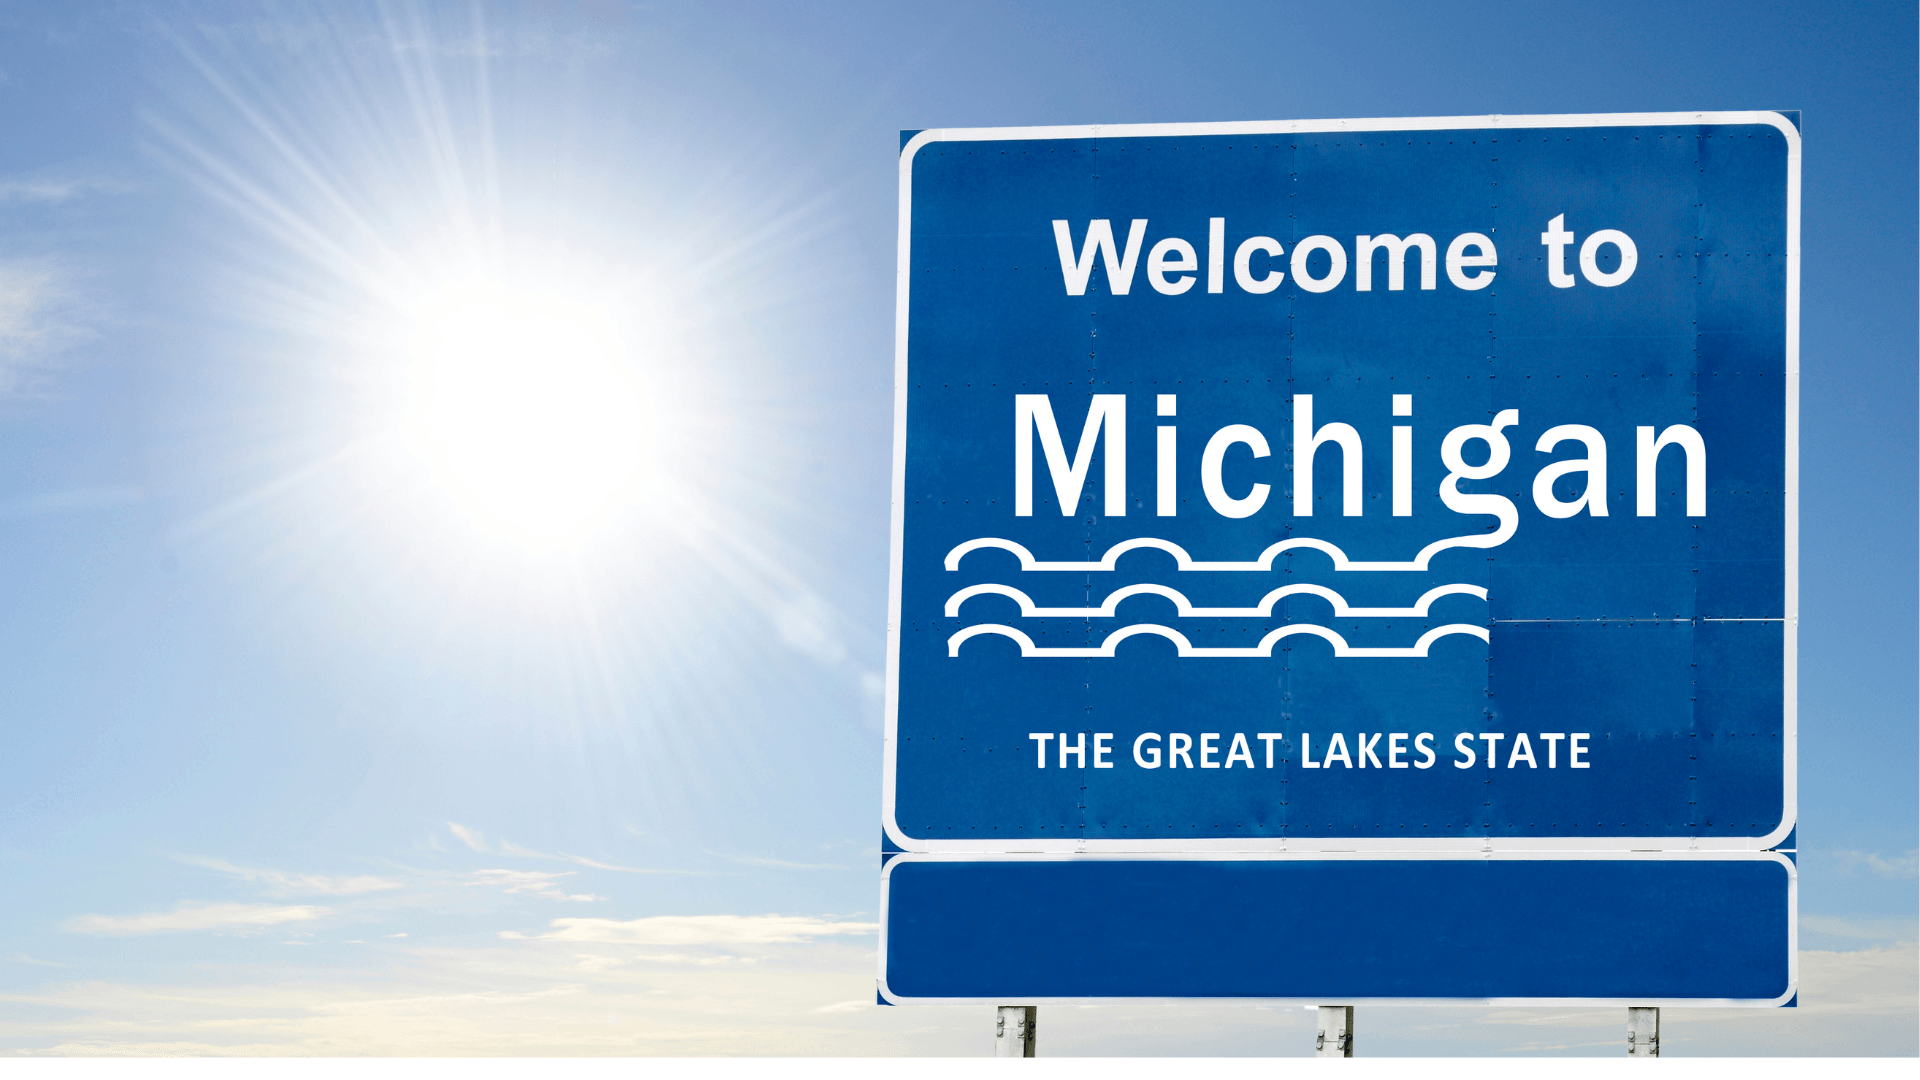 A welcome to Michigan sign greets visitors to the state.